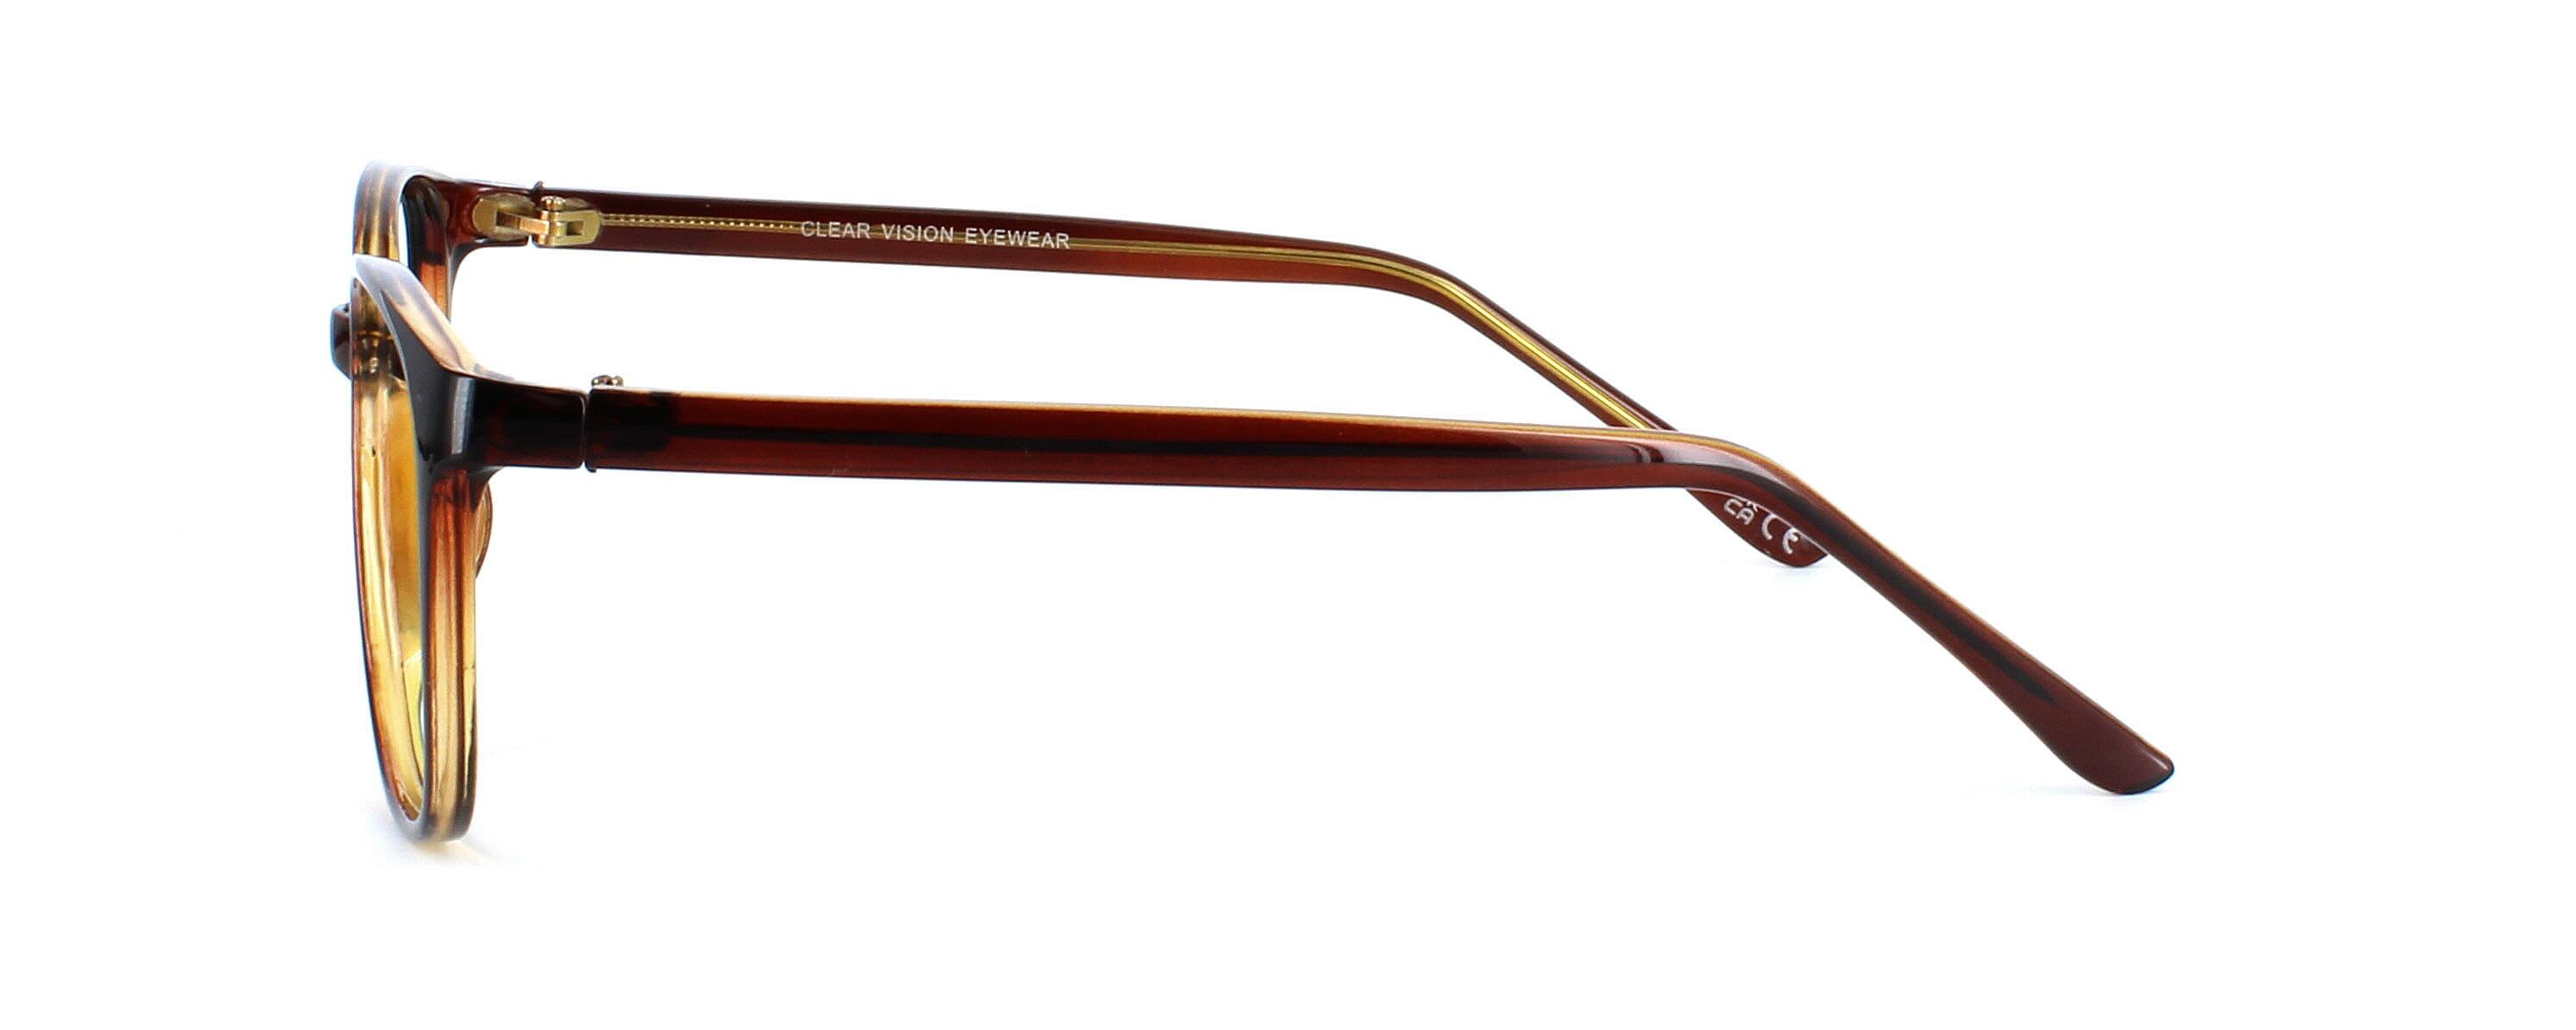 Como - Brown round shaped acetate glasses frame - image view 3